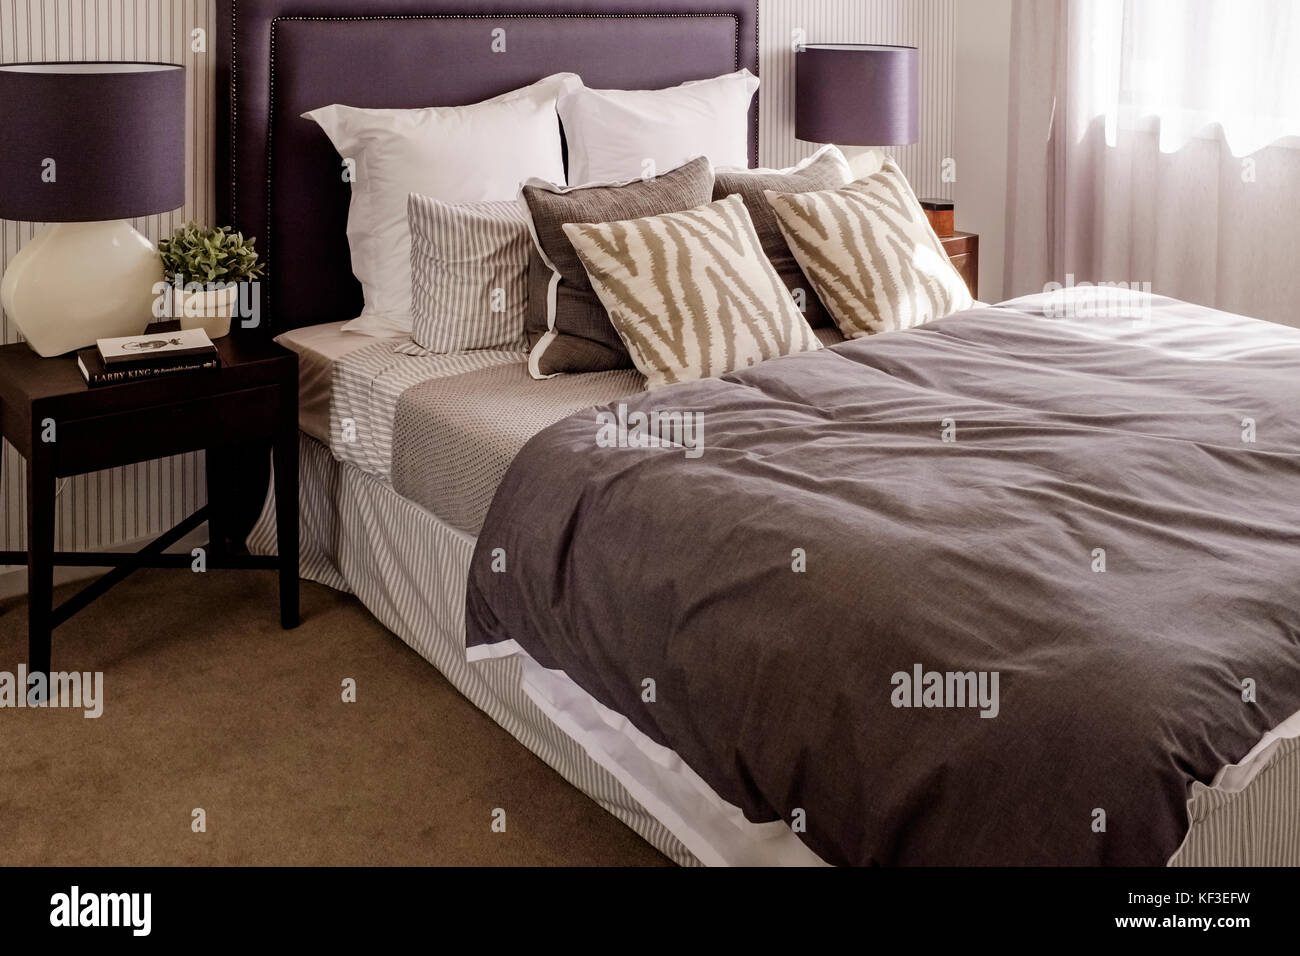 The bedroom of a modern Australian home featuring the latest on-trend decorations and accessories. Stock Photo